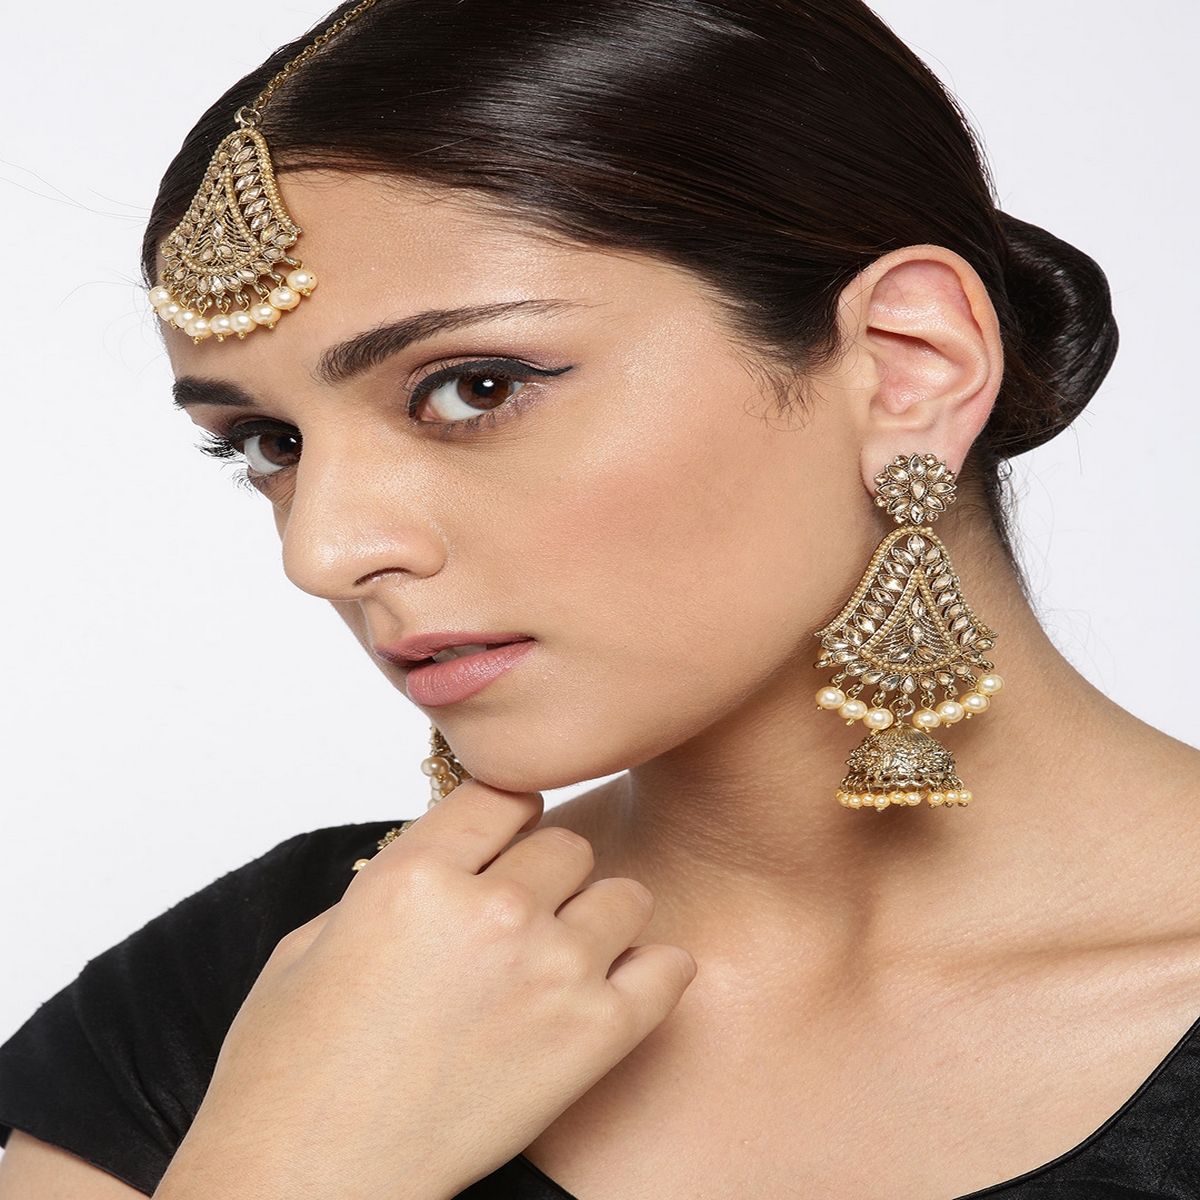 Latest Gold Jhumka Designs To Make You Fall In Love by Navrathan